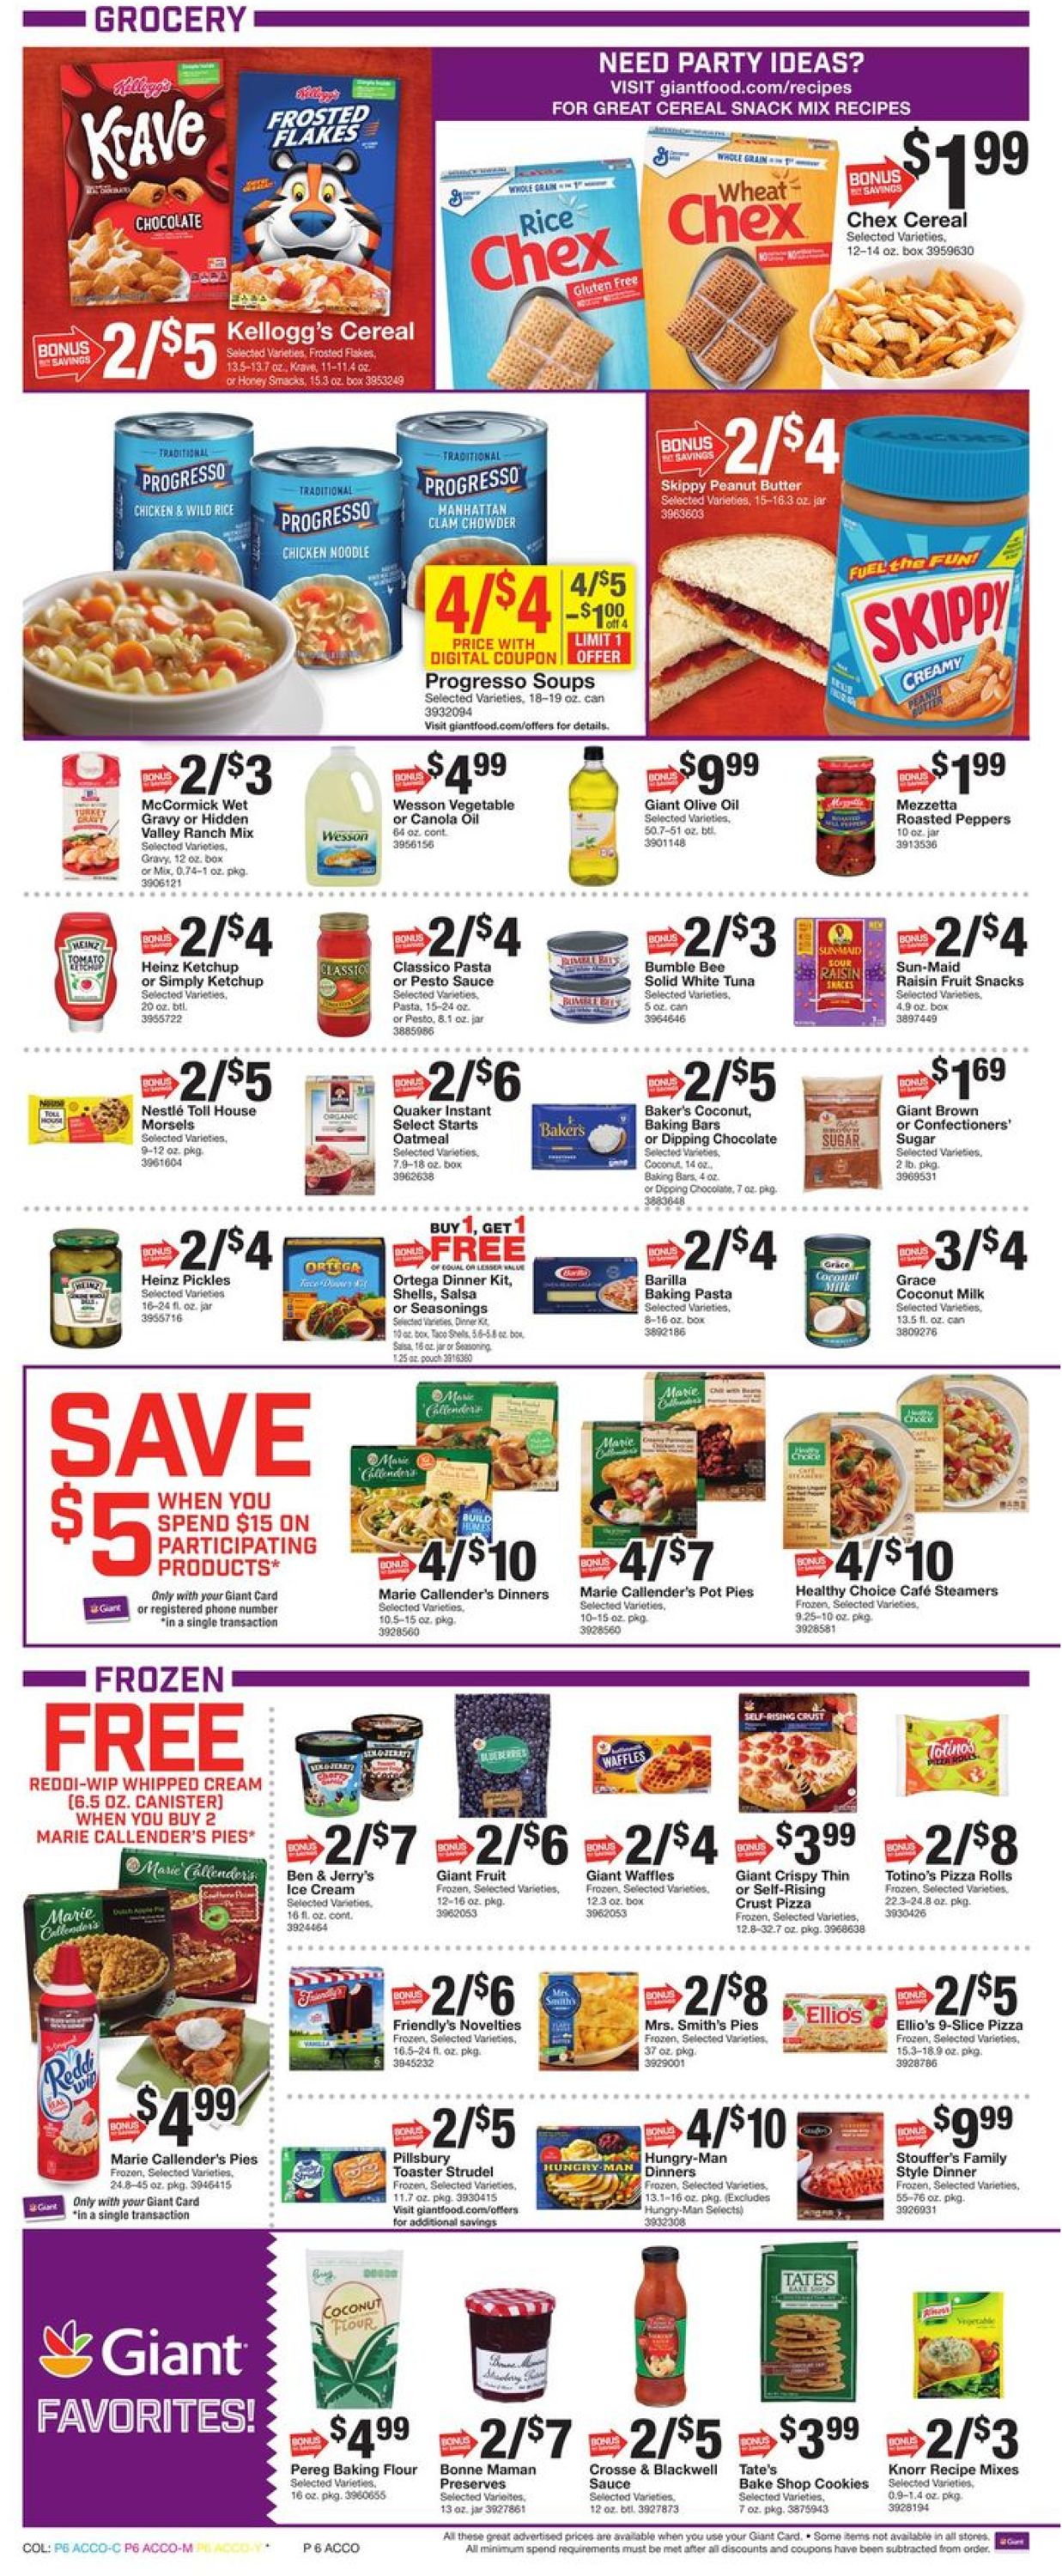 Giant Food - Thanksgiving Ad 2019 Current weekly ad 11/22 - 11/28/2019 ...